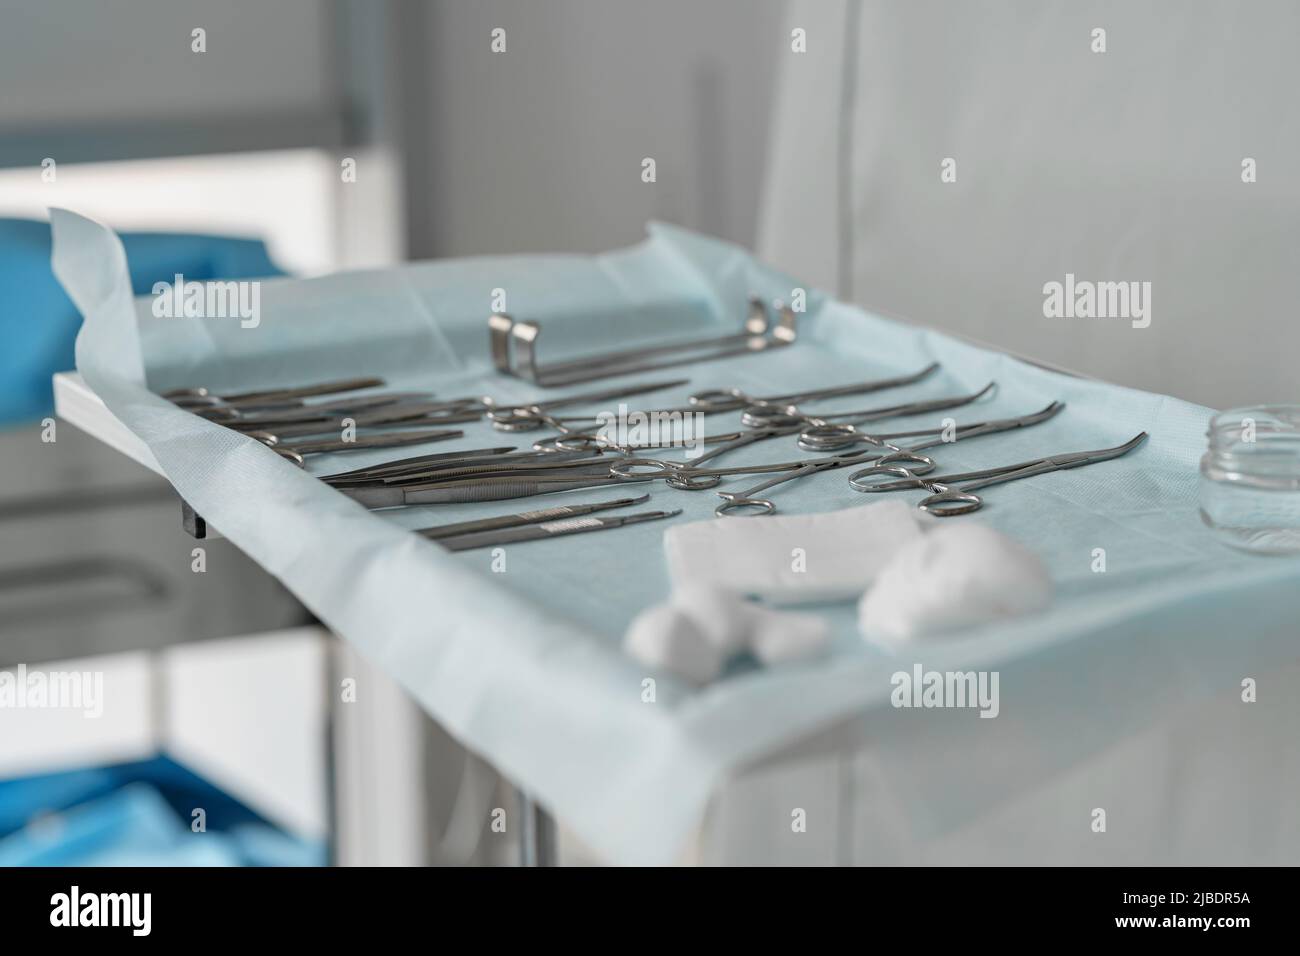 Surgical instruments and tools including scalpels forceps and tweezers arranged on table for surgery Stock Photo